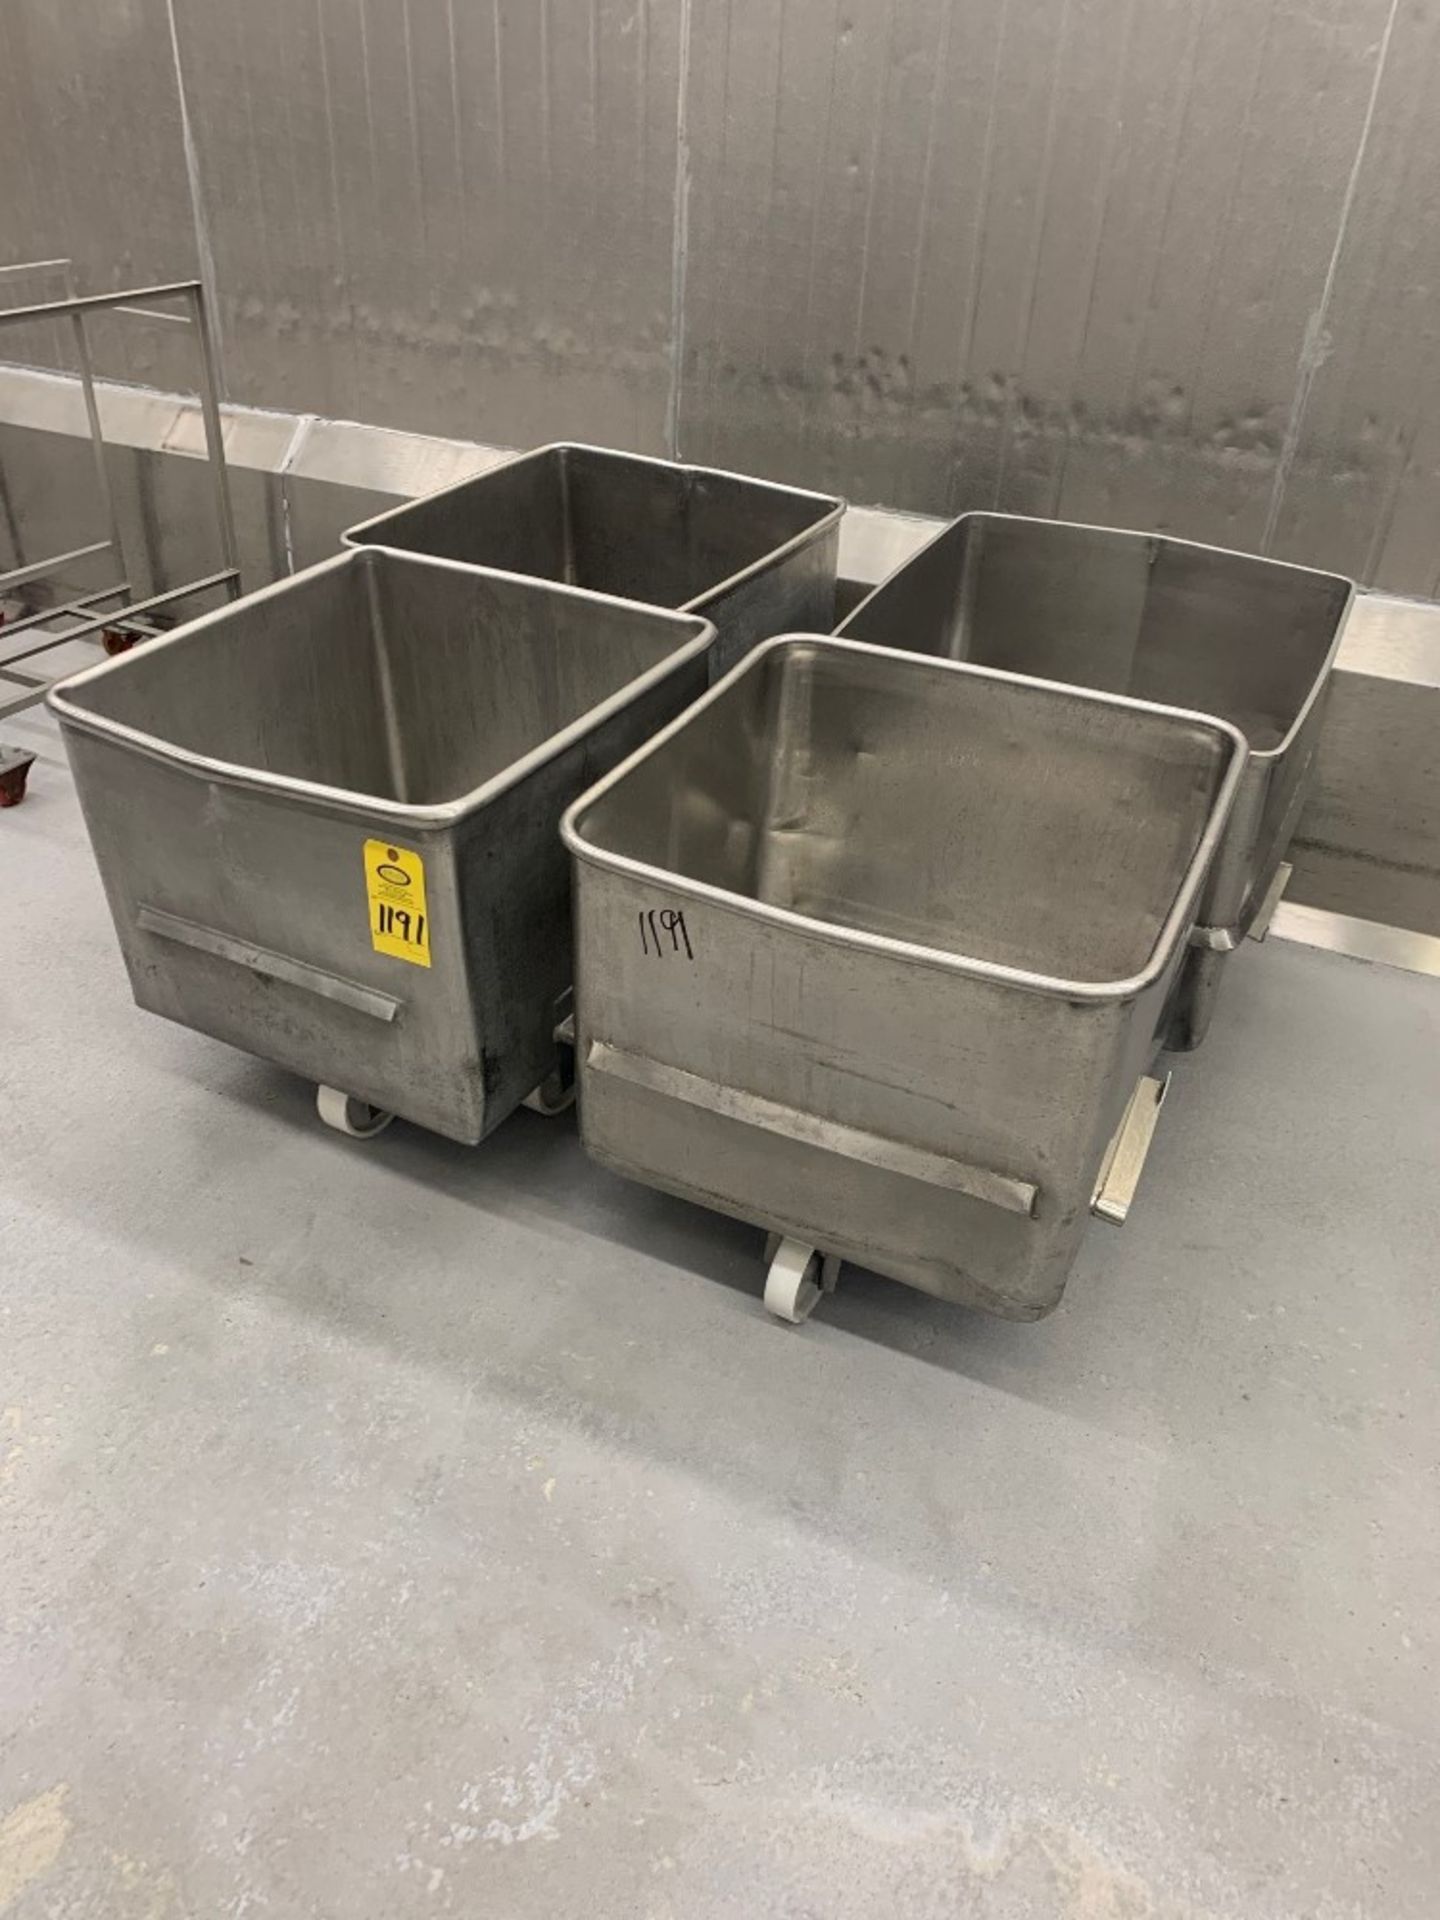 Vemag 400 Lb. Carts: Required Loading Fee $100.00, Rigger-Norm Pavlish, Nebraska Stainless (402)